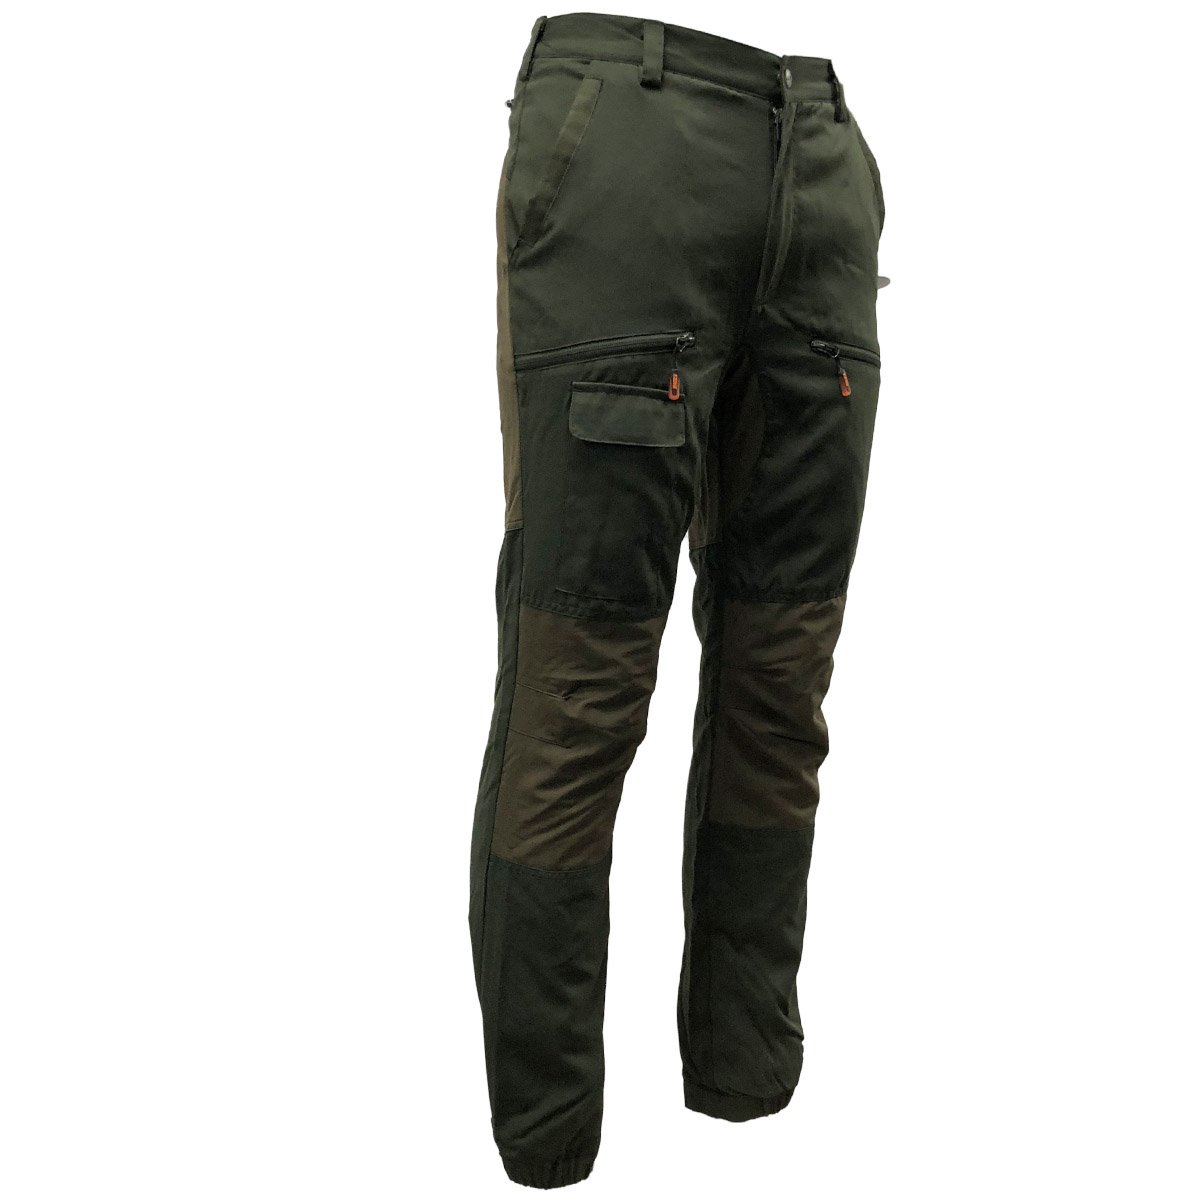 Game Technical Apparel Men's Trouser and Jacket T_HB848 - Trousers - 44